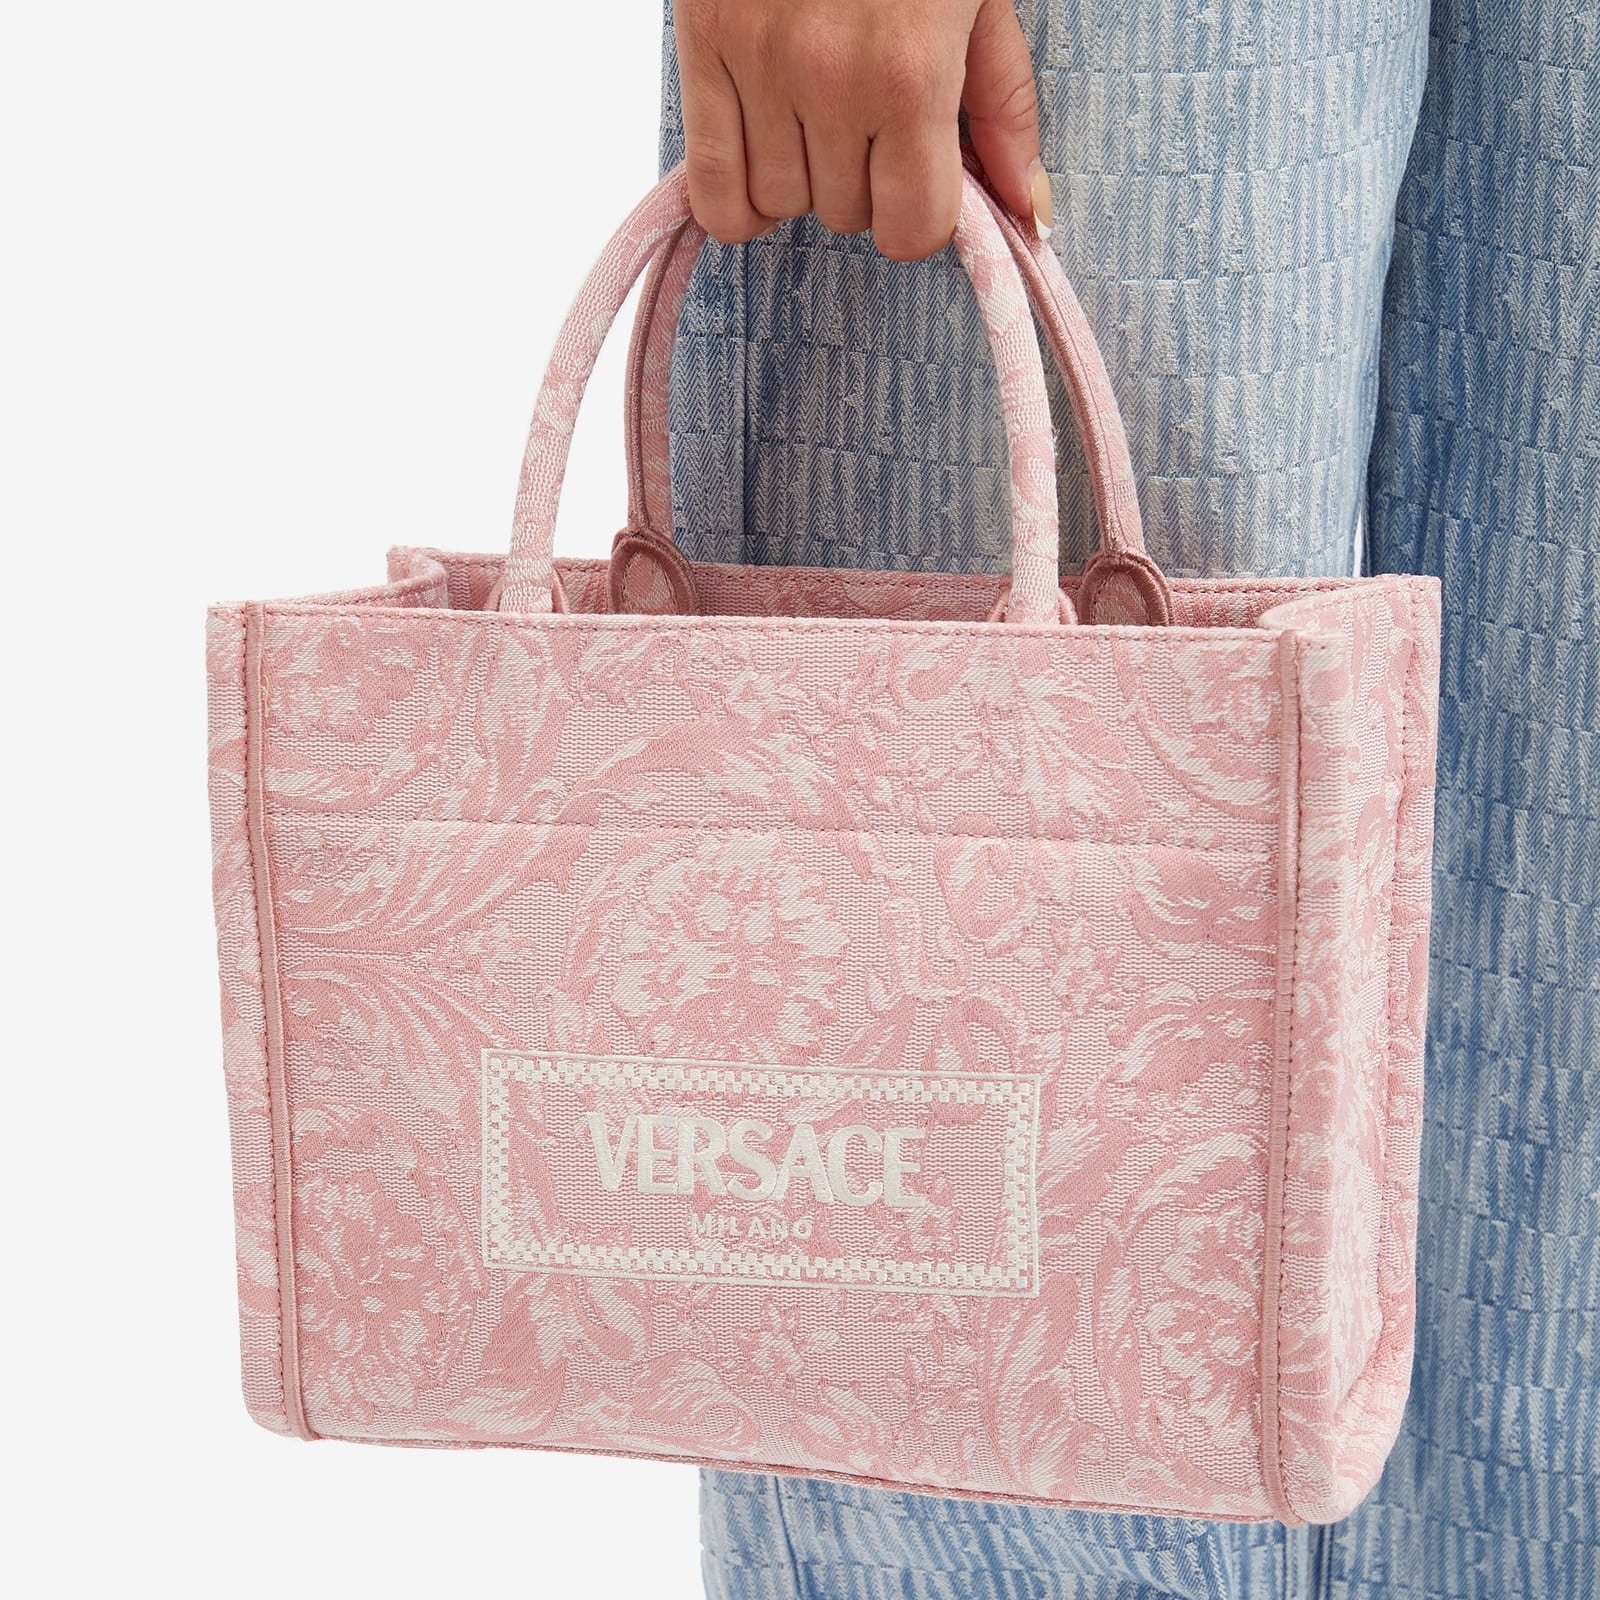 Versace Medium Tote Bag In Embroidery Jacquard - 2